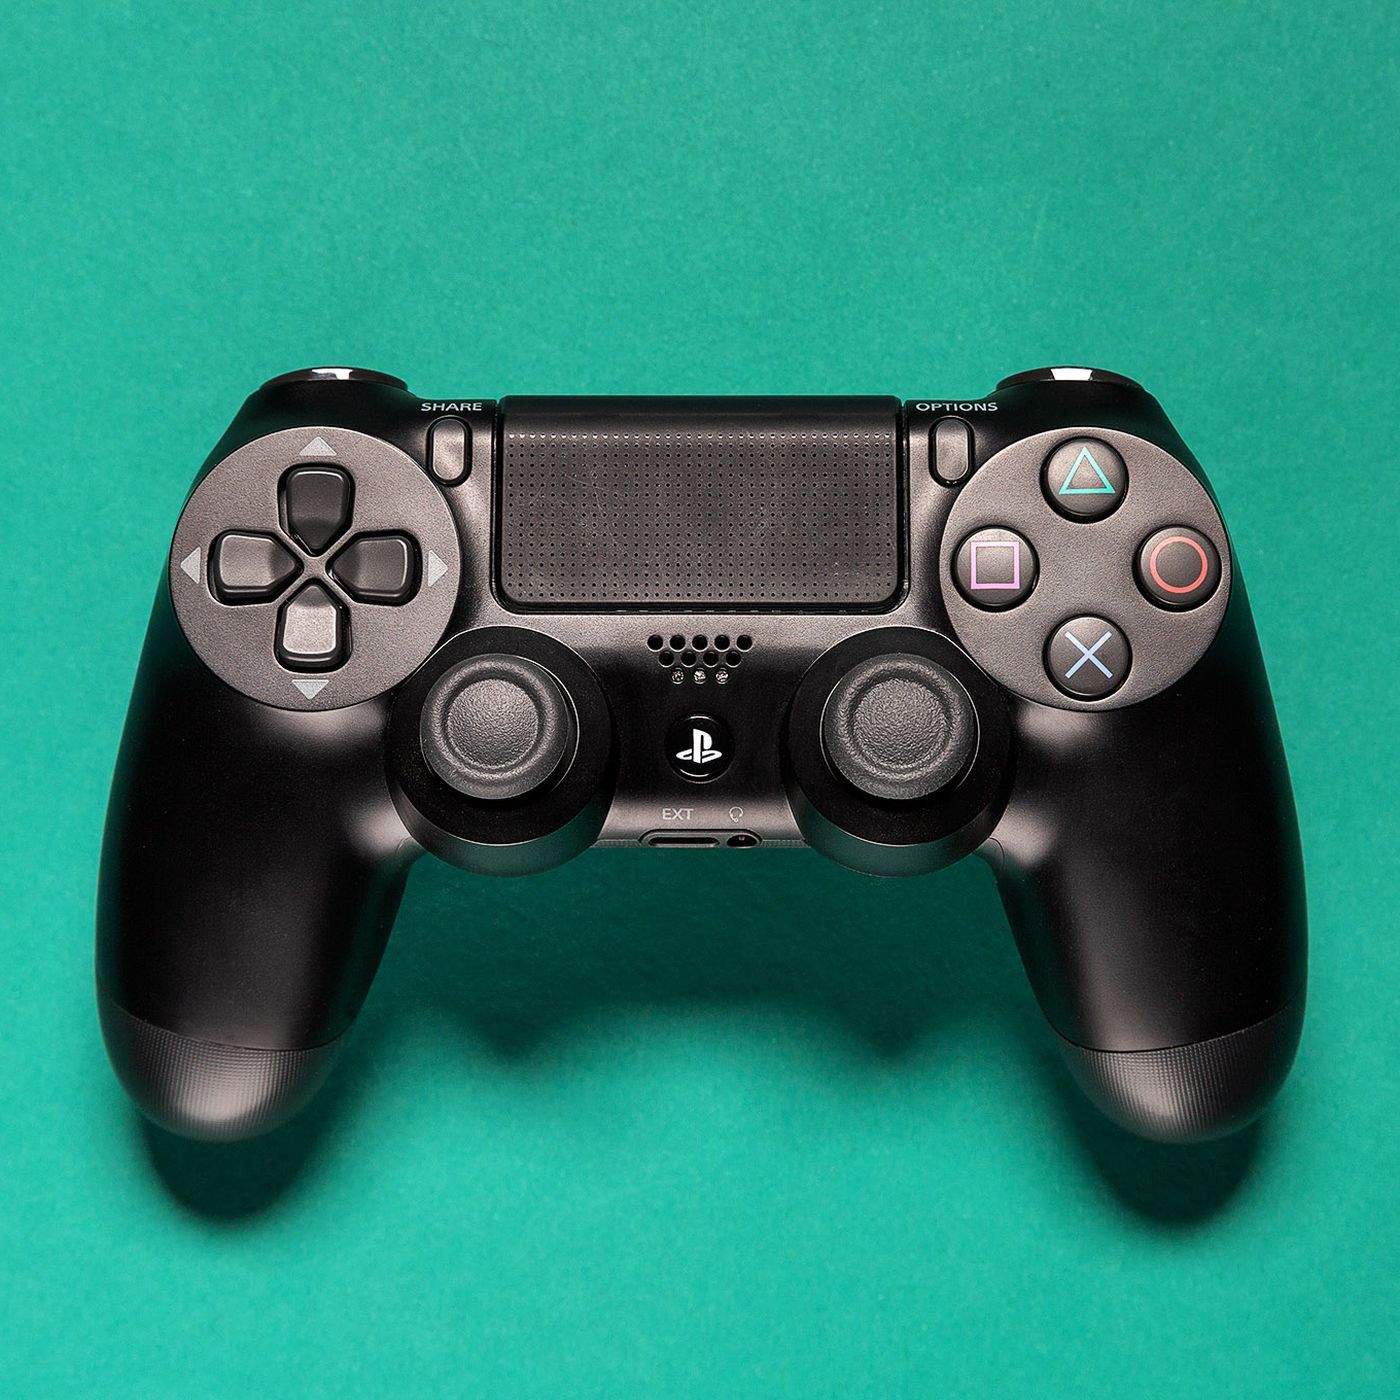 How to pair PS4 or Xbox controllers with iPhone, iPad, Apple TV